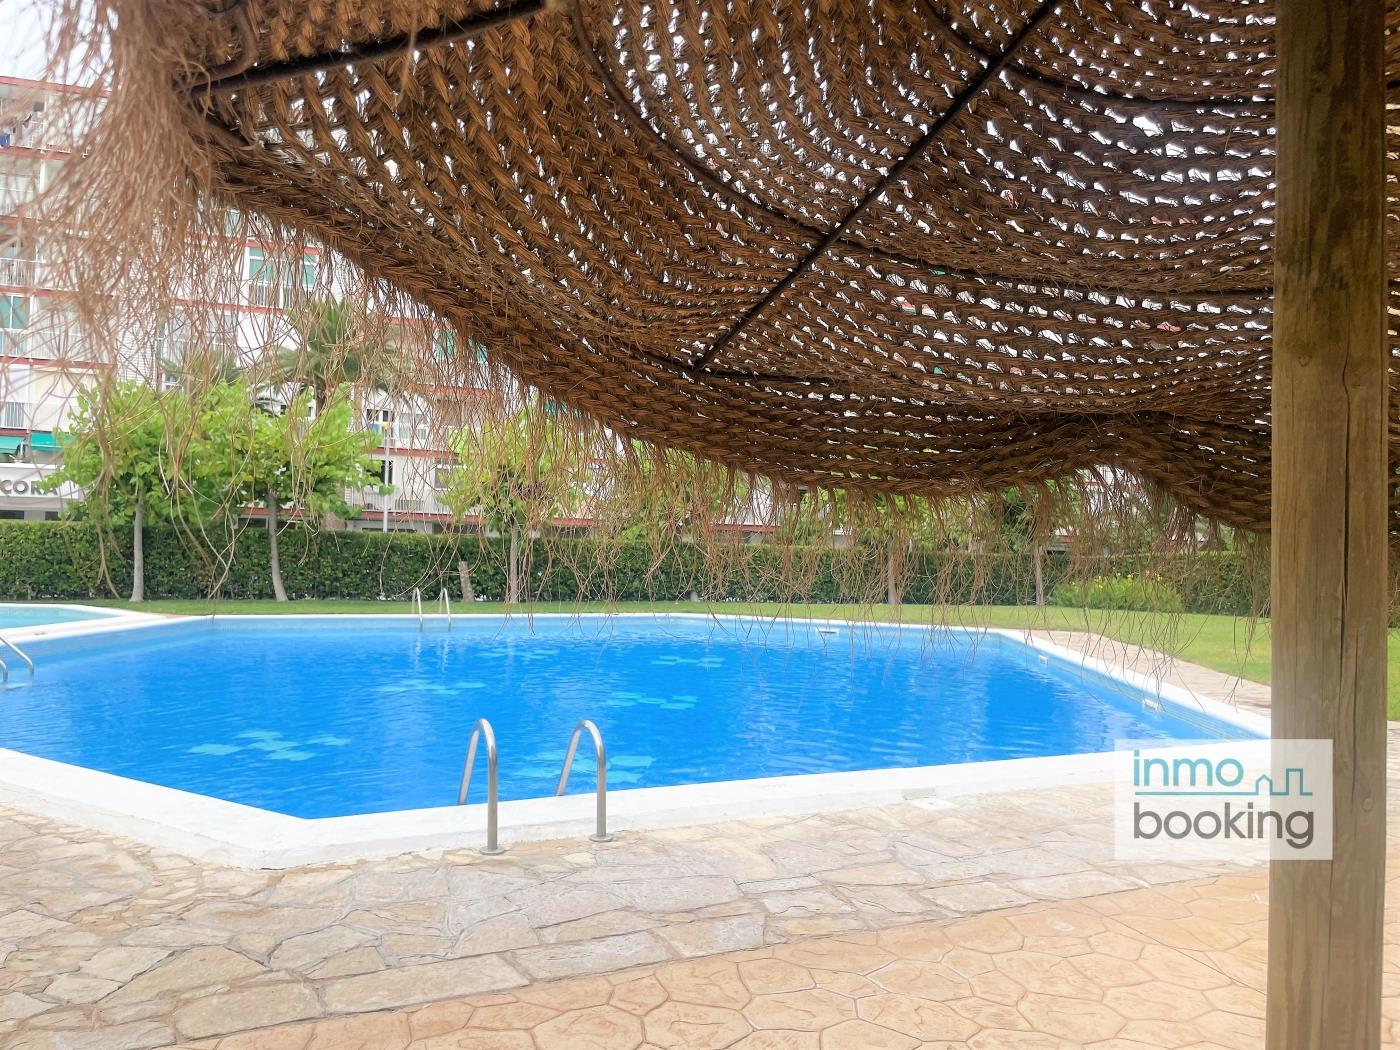 InmoBooking BEACH, air-conditioned and 5 minutes walk from the beach. in La Pineda